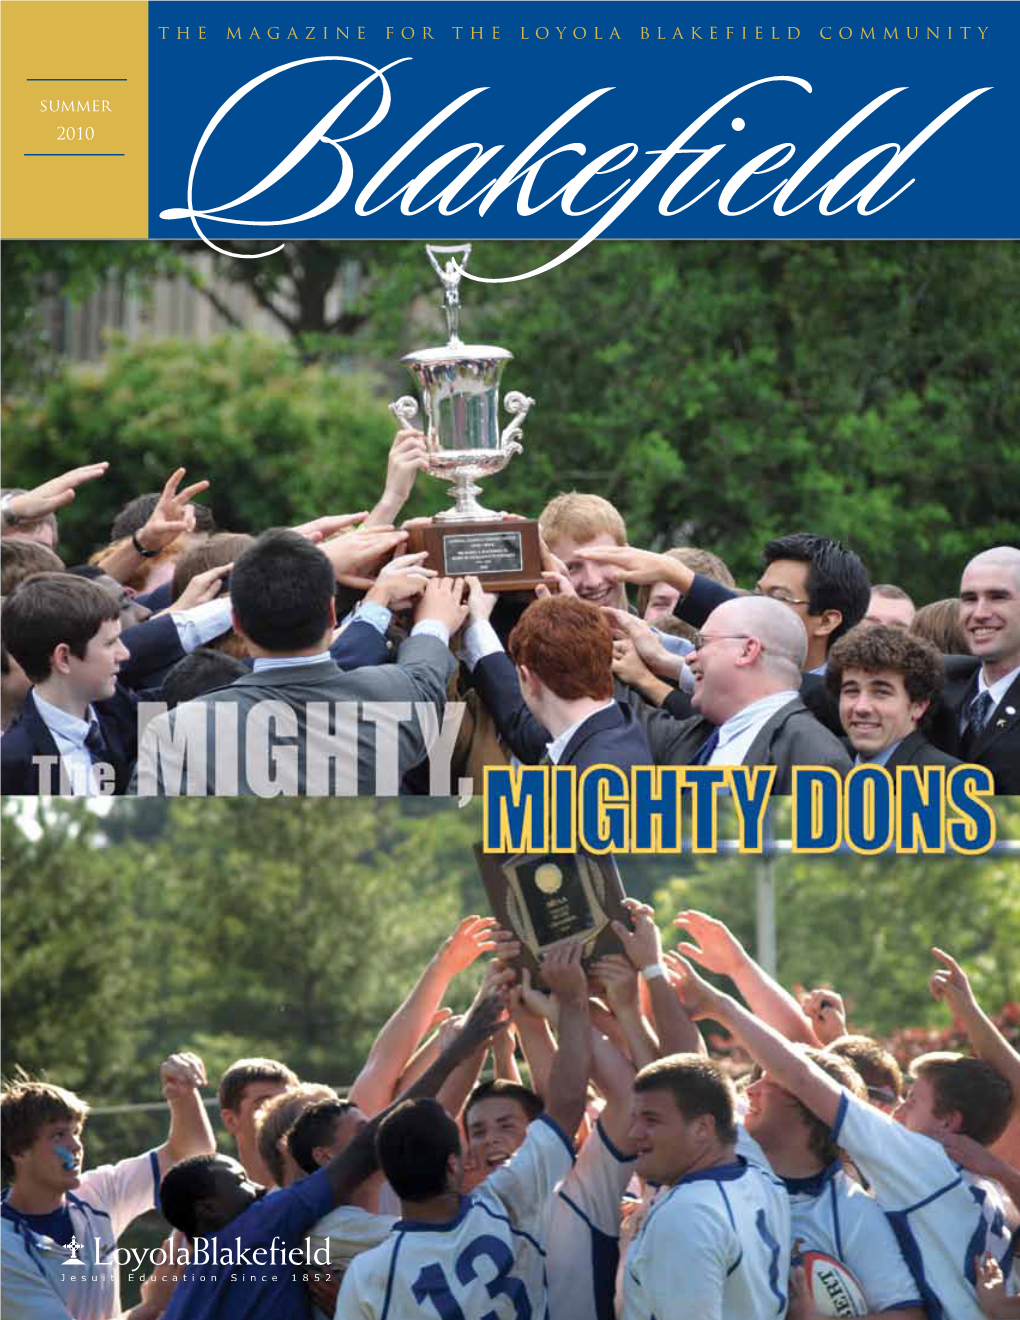 The Magazine for the Loyola Blakefield Community